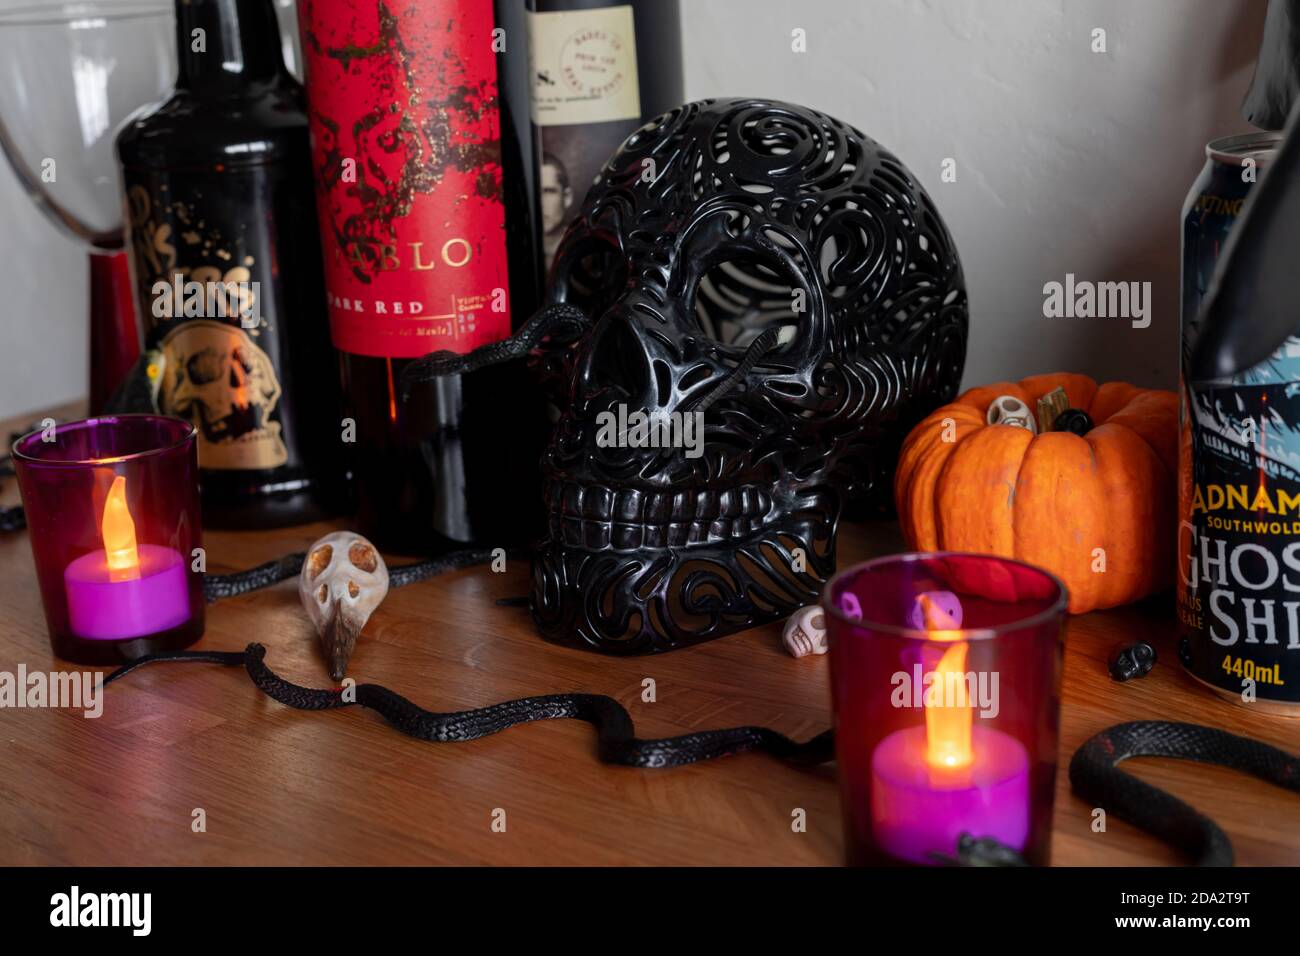 Halloween party decorations and alcohol Stock Photo